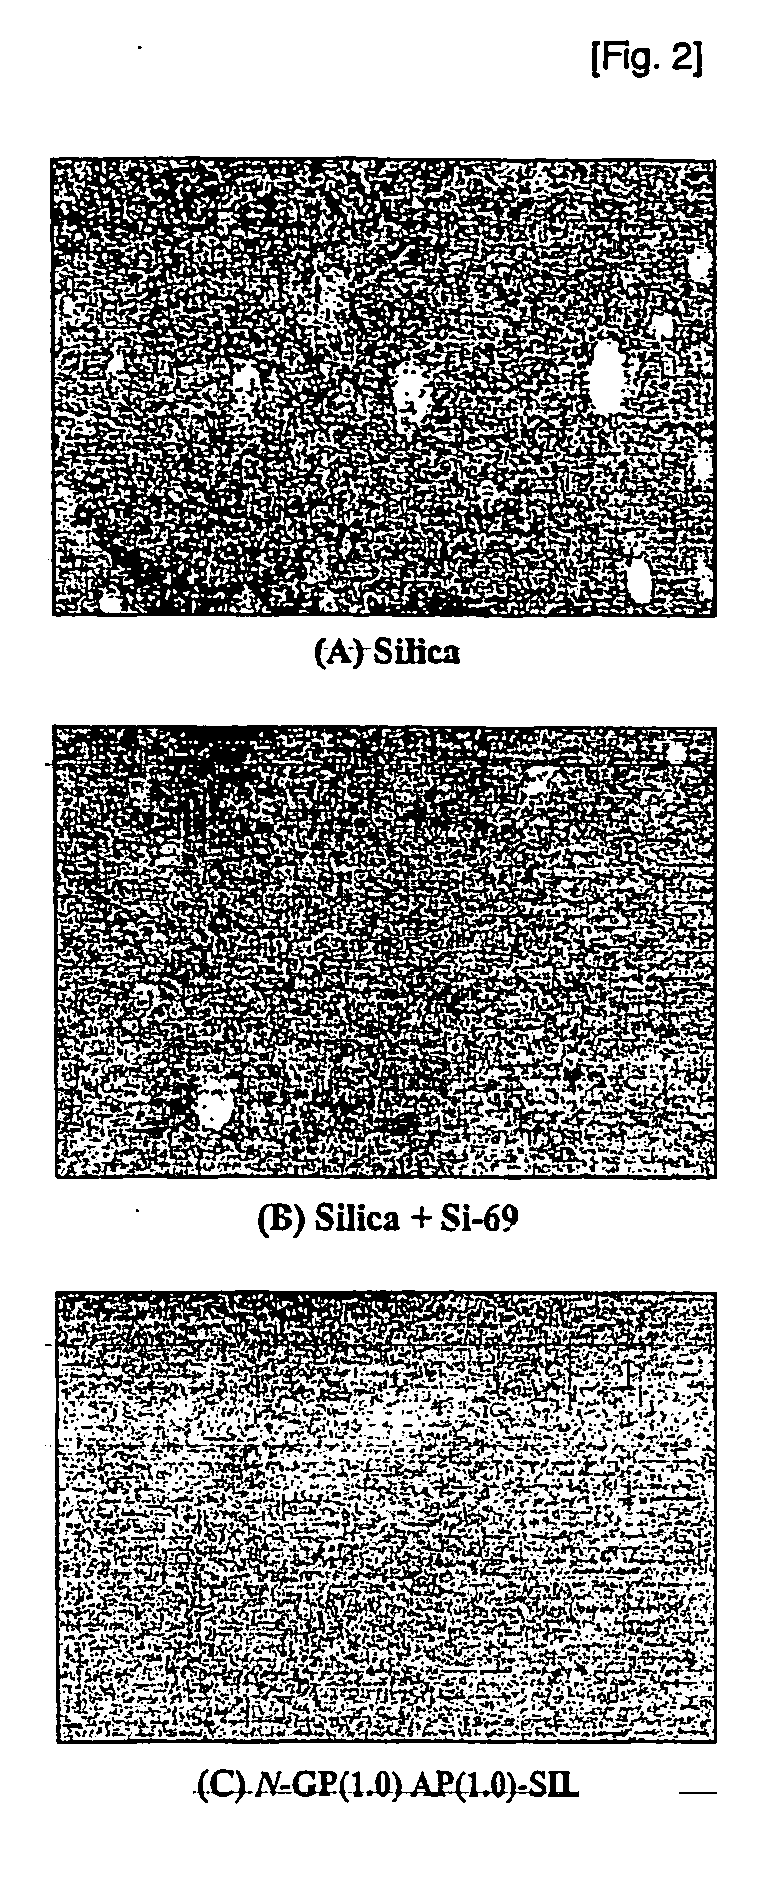 Network silica for enhancing tensile strength of rubber compound